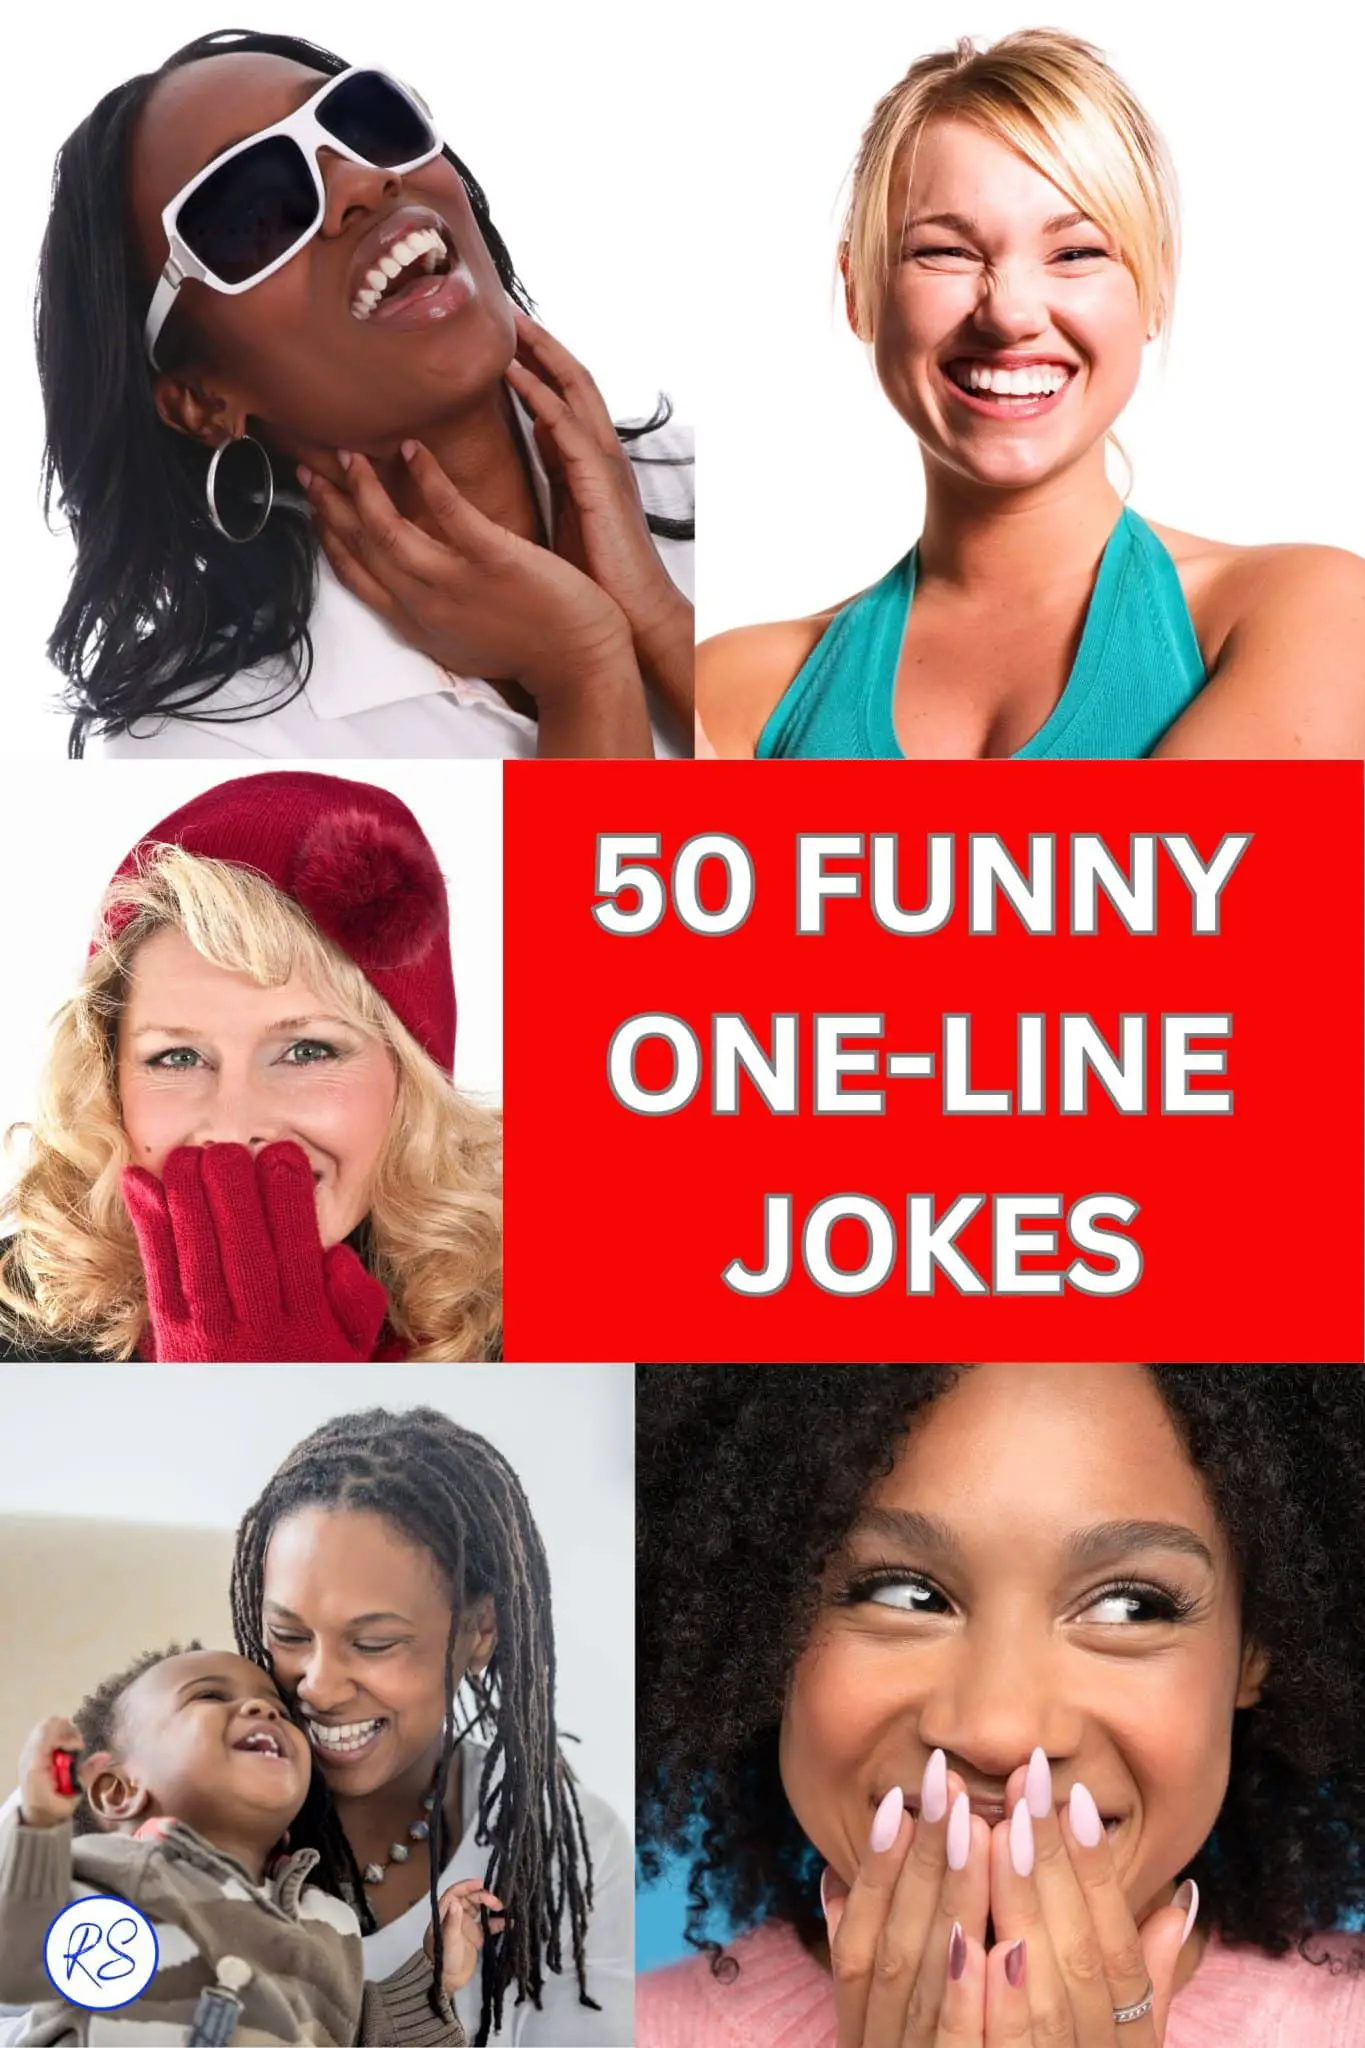 50 funny one-line jokes that’ll tickle you - Roy Sutton